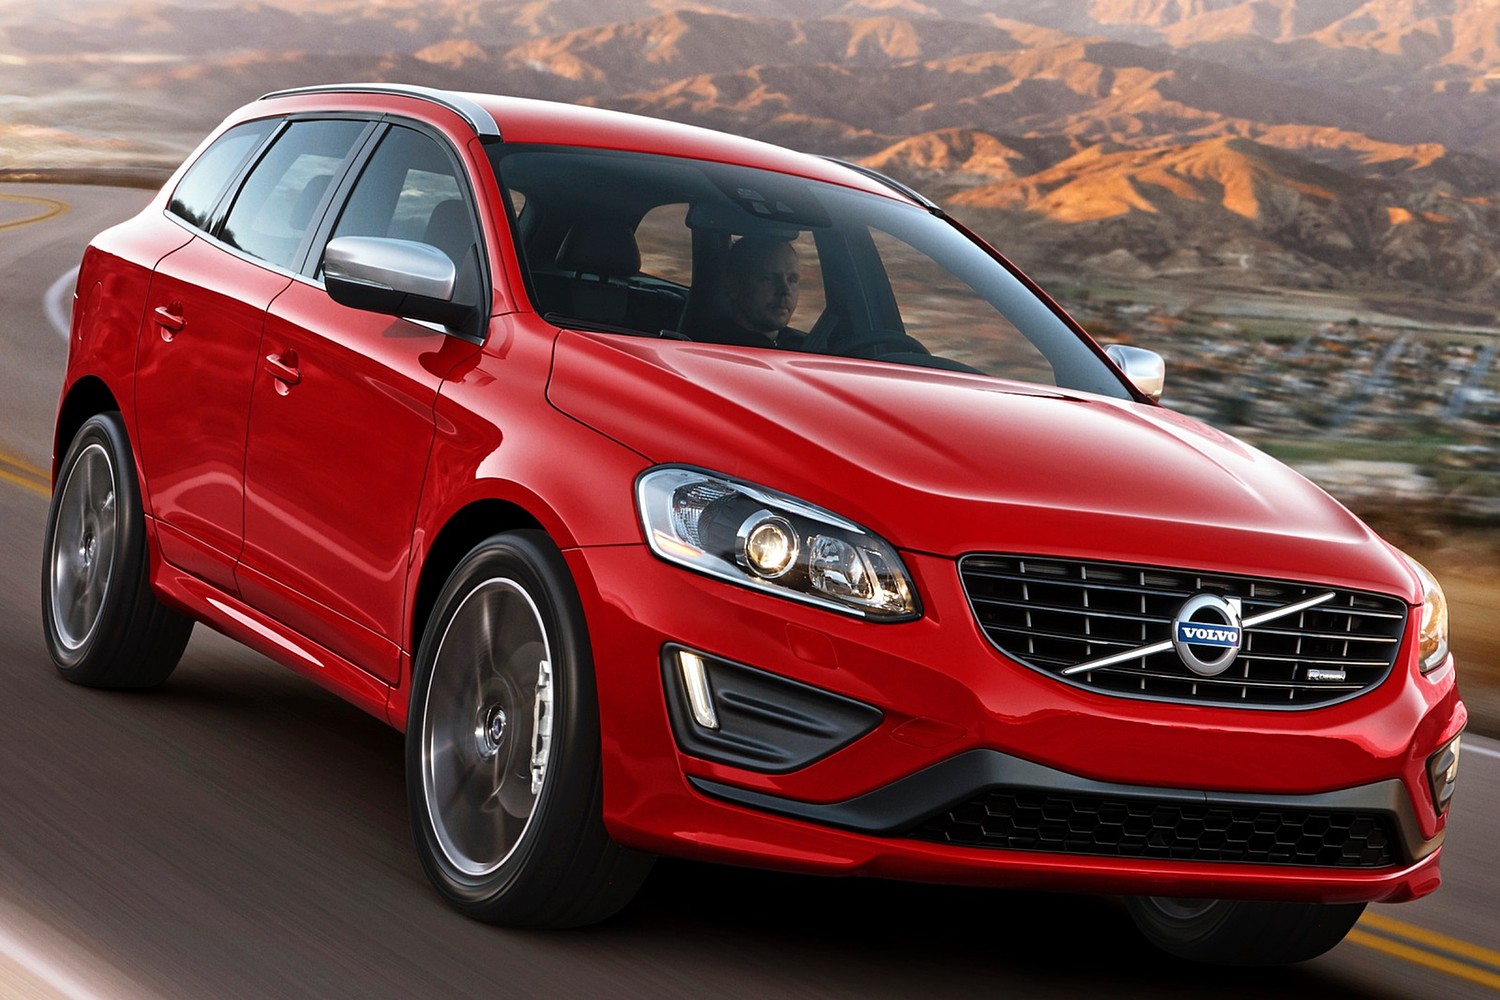 Volvo XC60 T6 R-Design 4dr SUV Exterior (2014 model year shown)